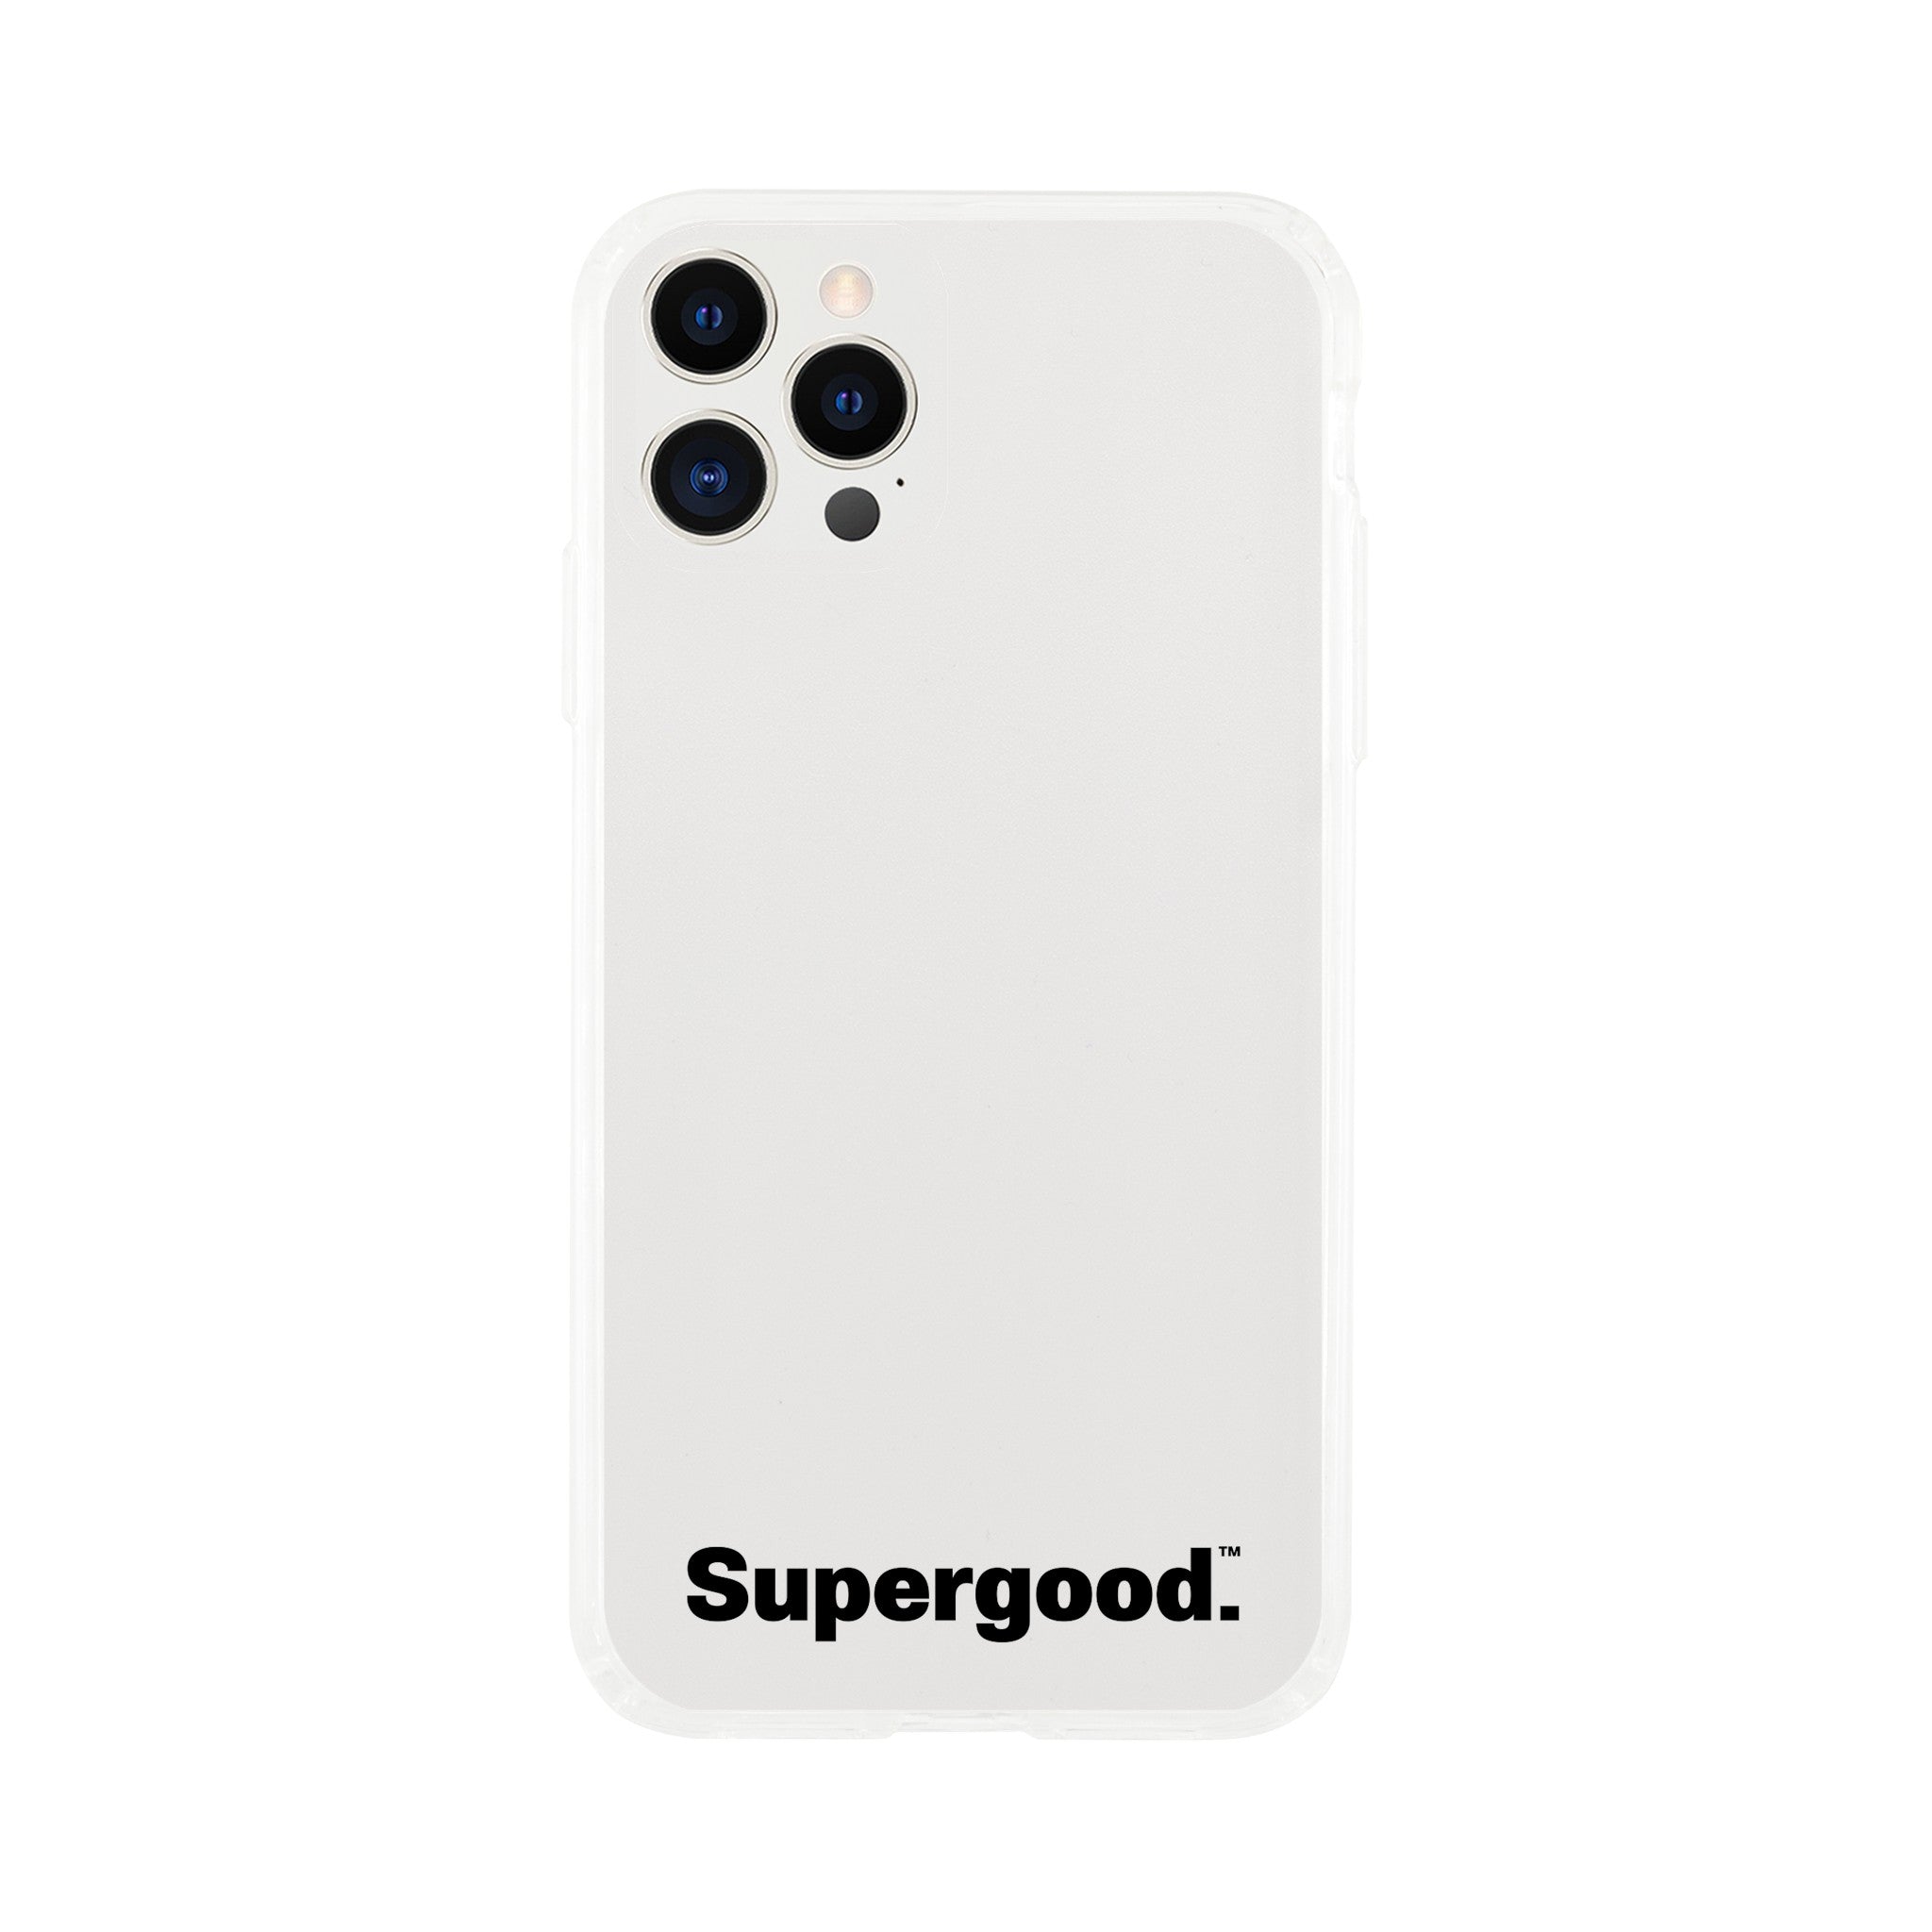 Black Text Clear Case for iPhone by Supergood.-Supergood.